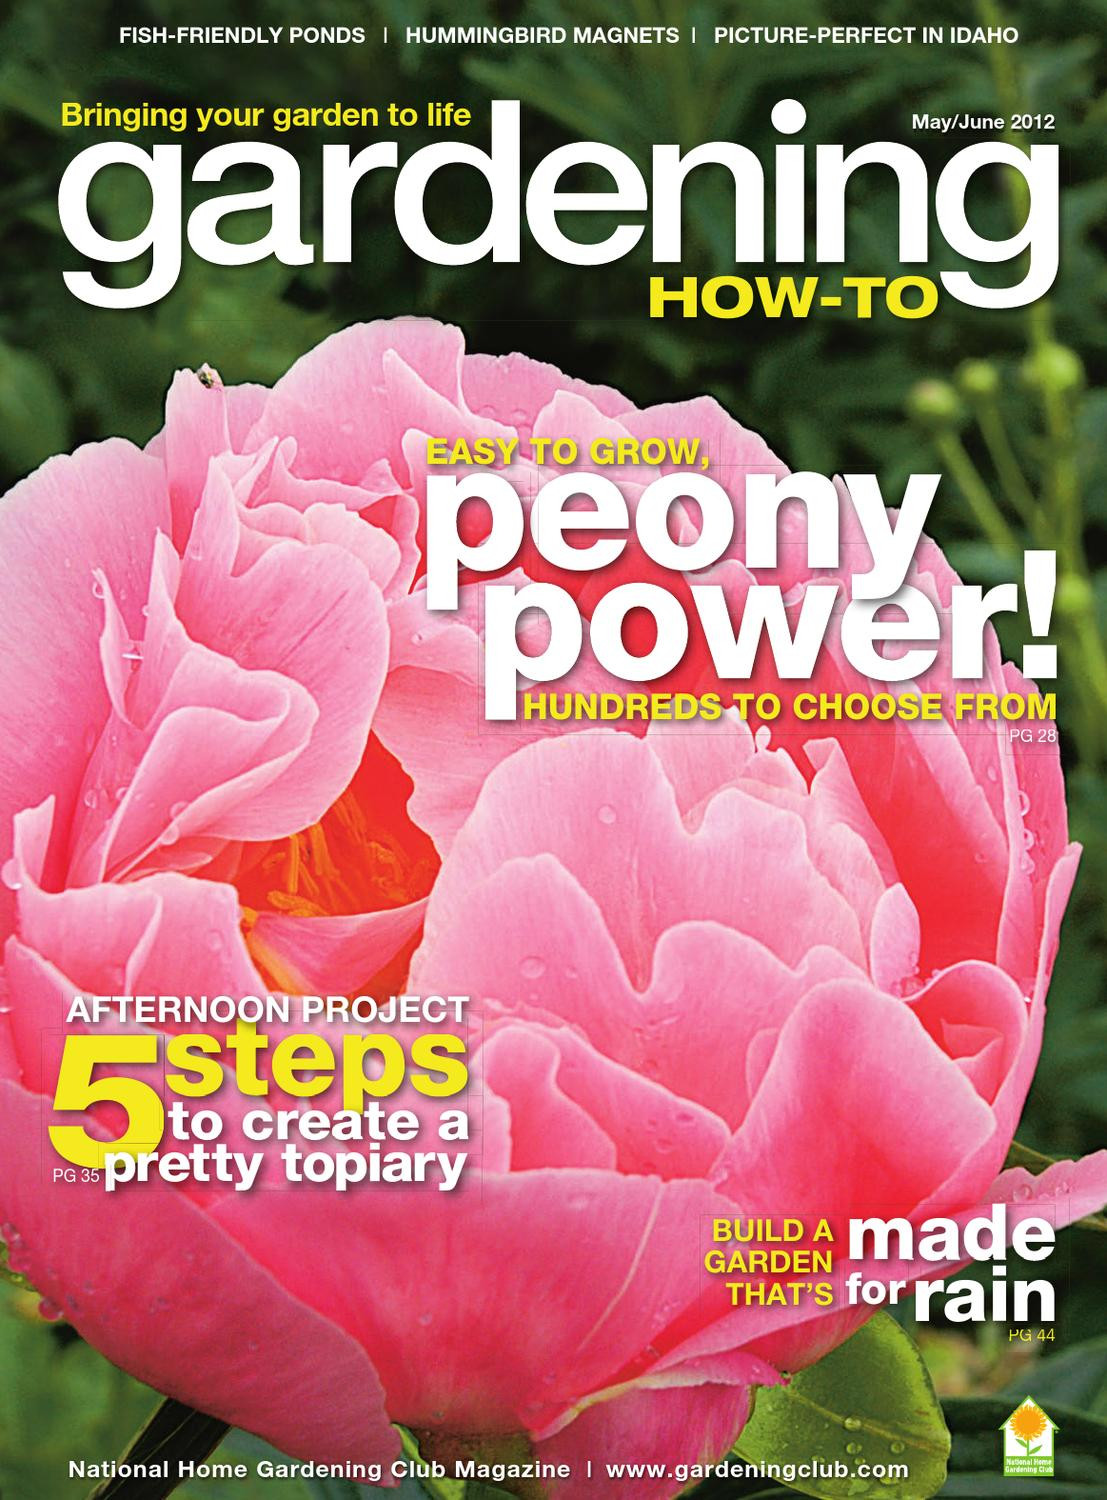 18 Cute the Empty Vase Florist Little Rock Ar 2024 free download the empty vase florist little rock ar of gardening how to may june 2012 by steven rindner issuu with page 1